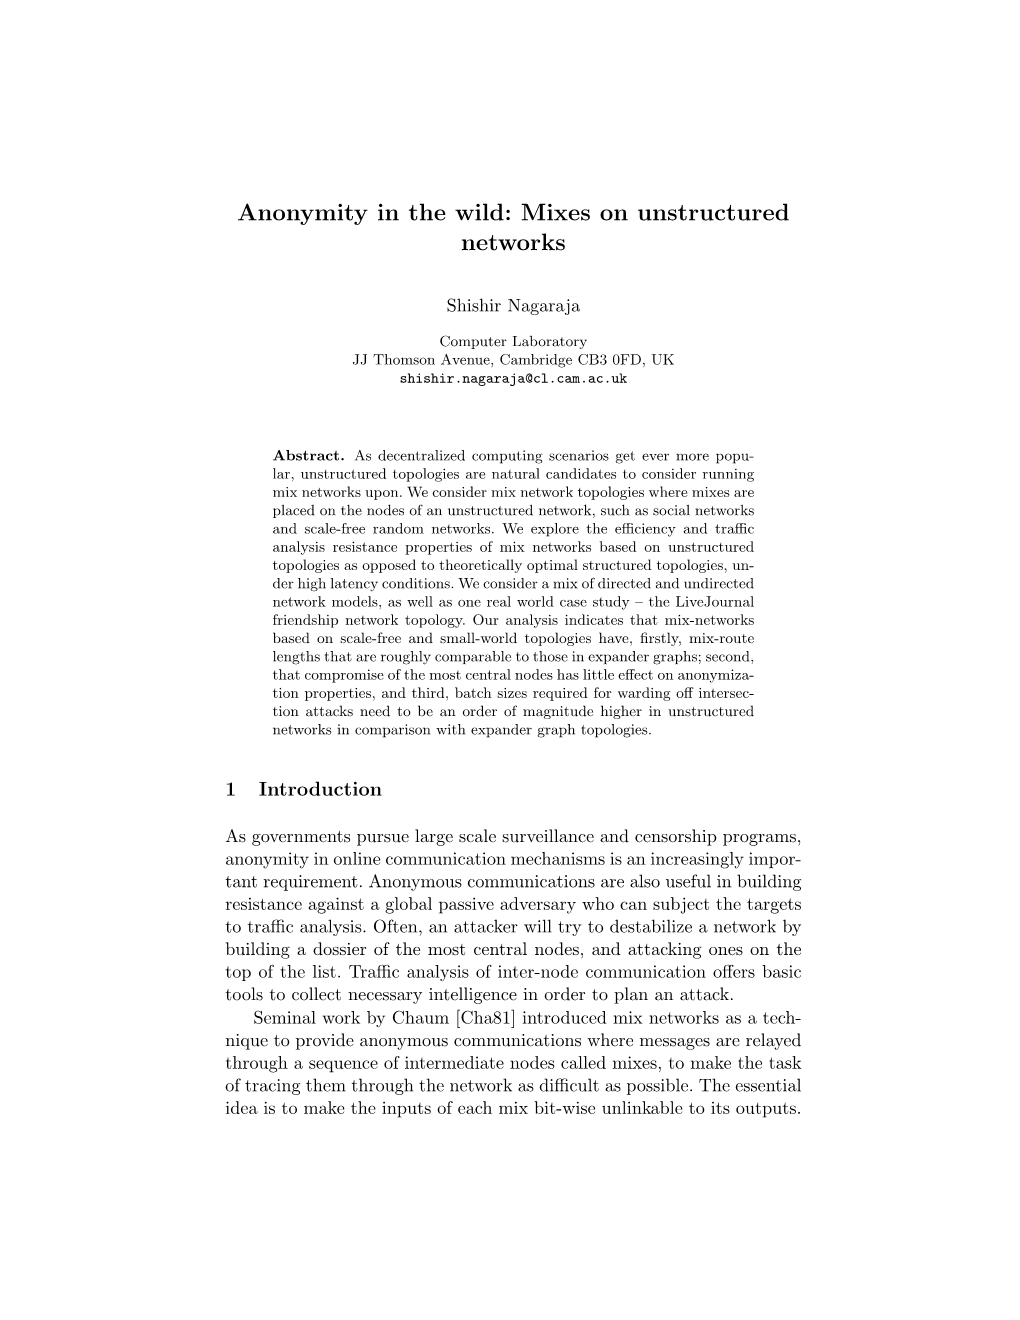 Anonymity in the Wild: Mixes on Unstructured Networks